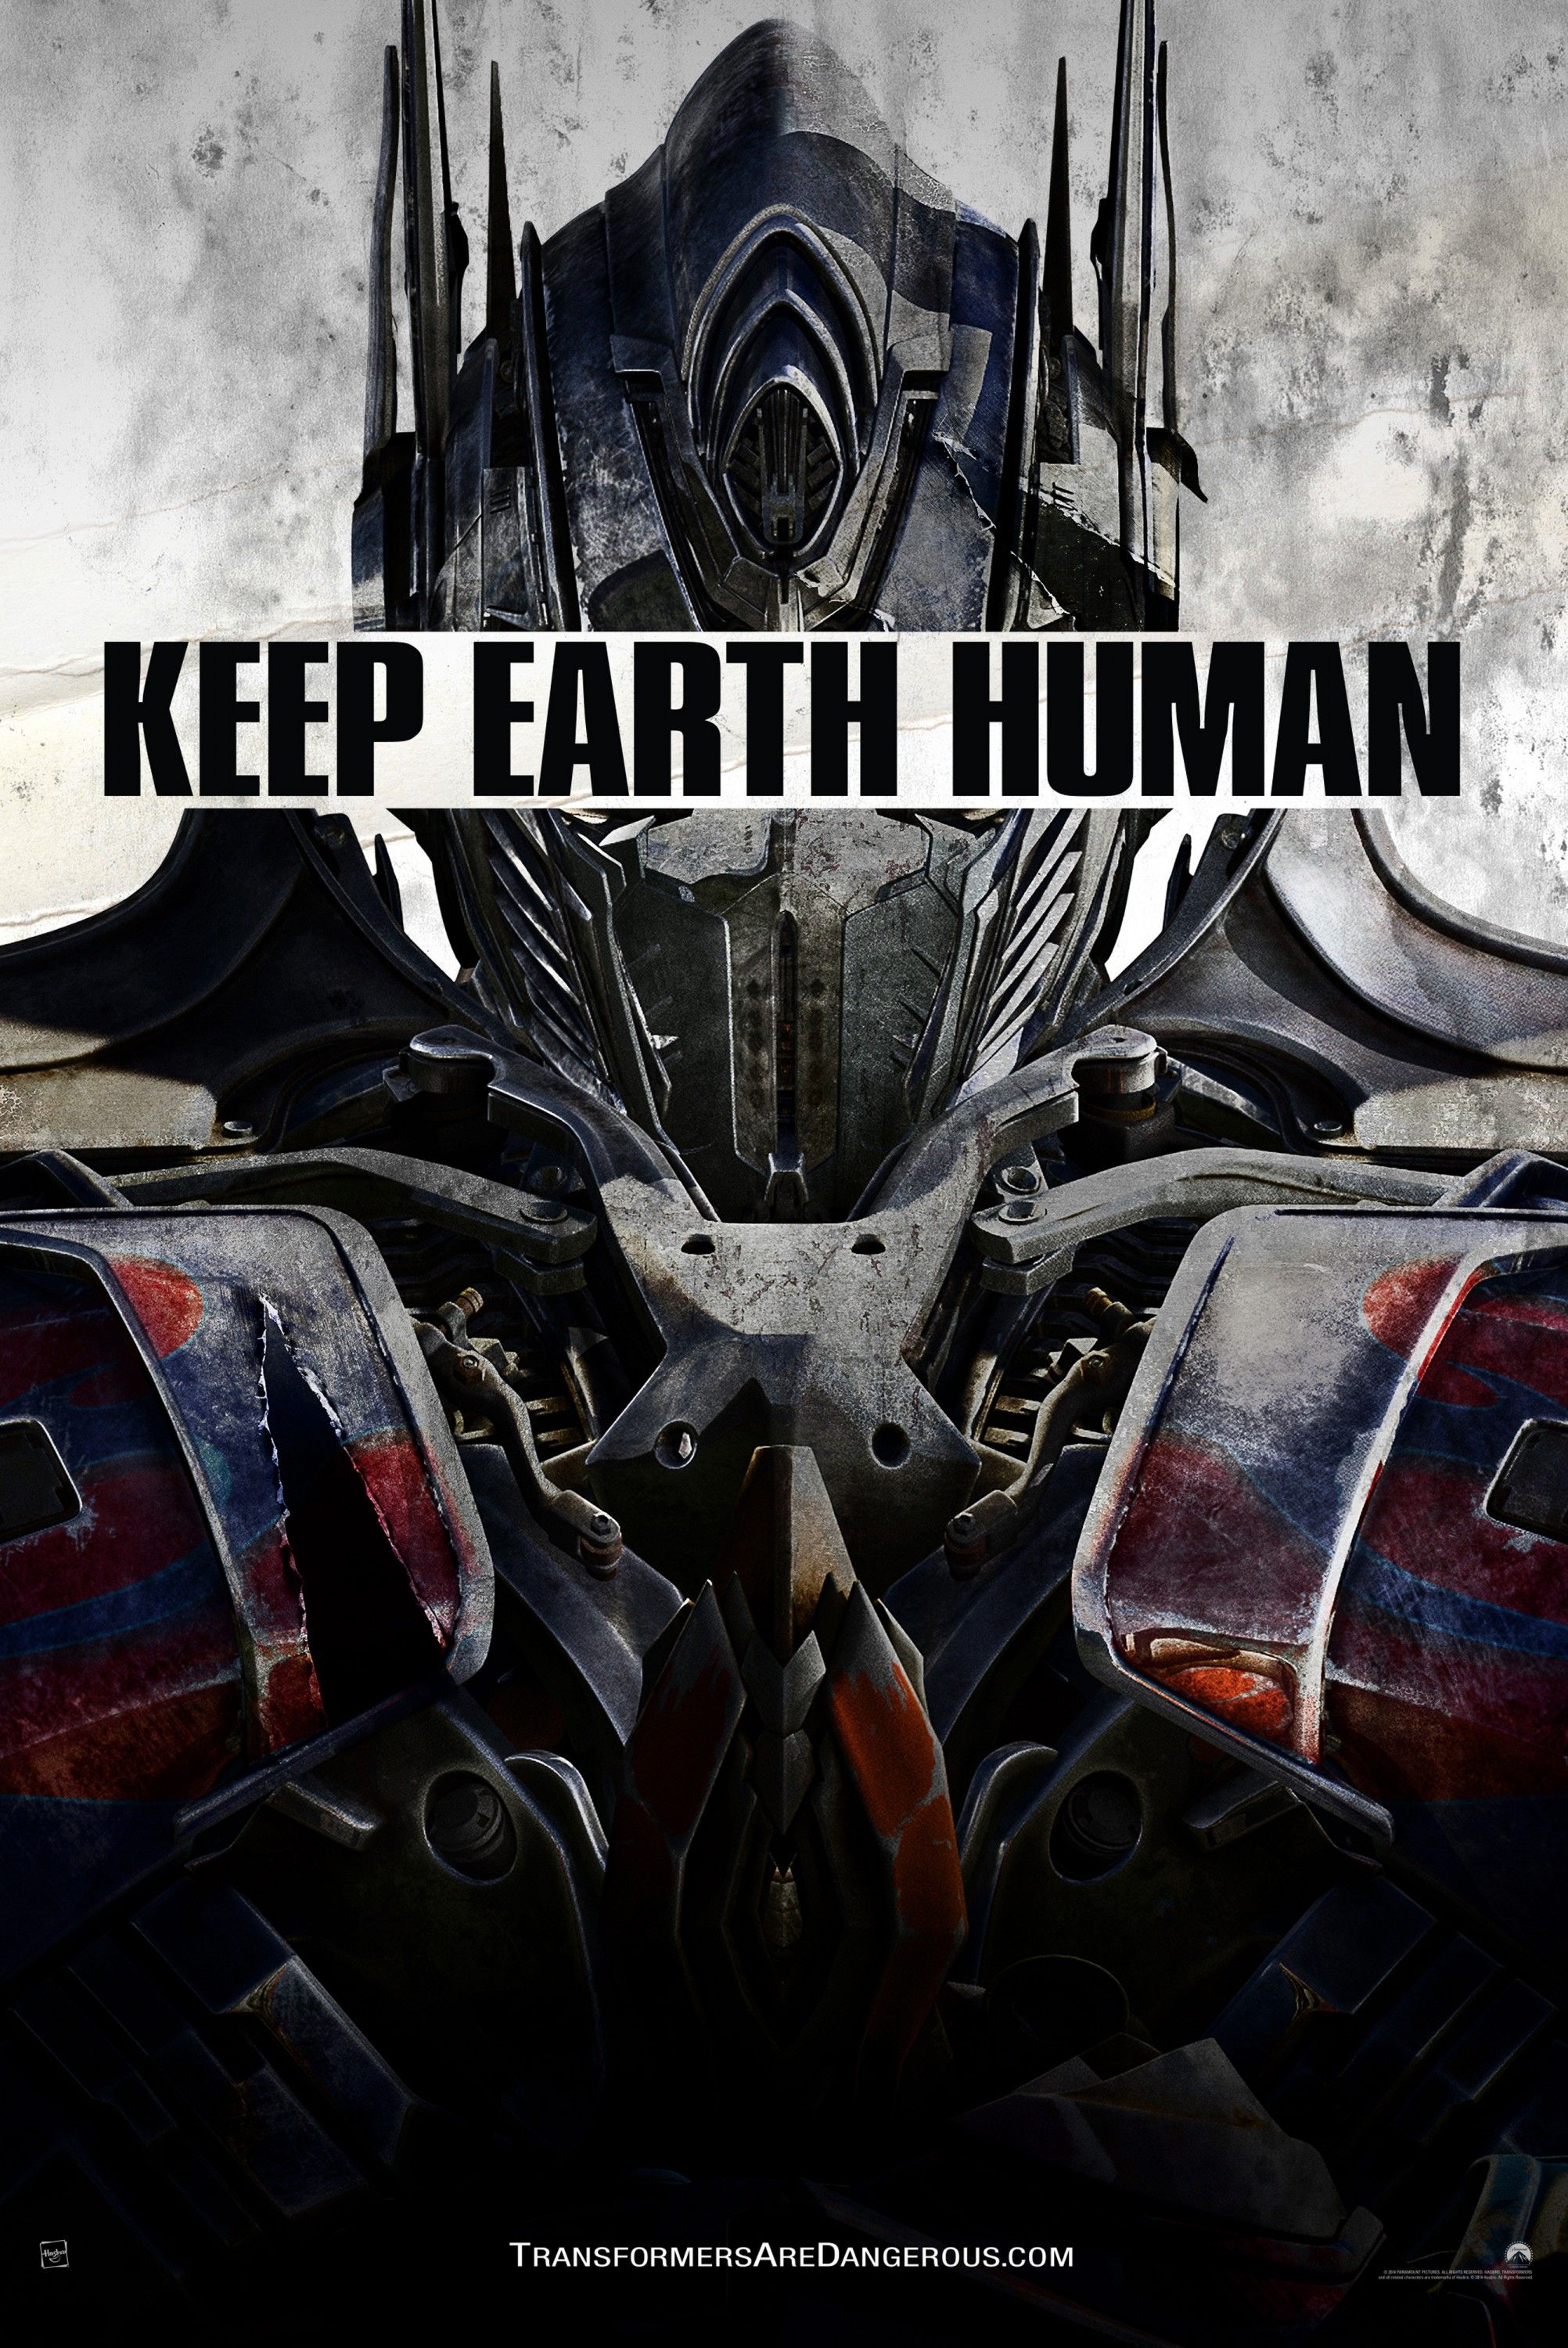 Transformers: Age of Extinction Viral Poster 1